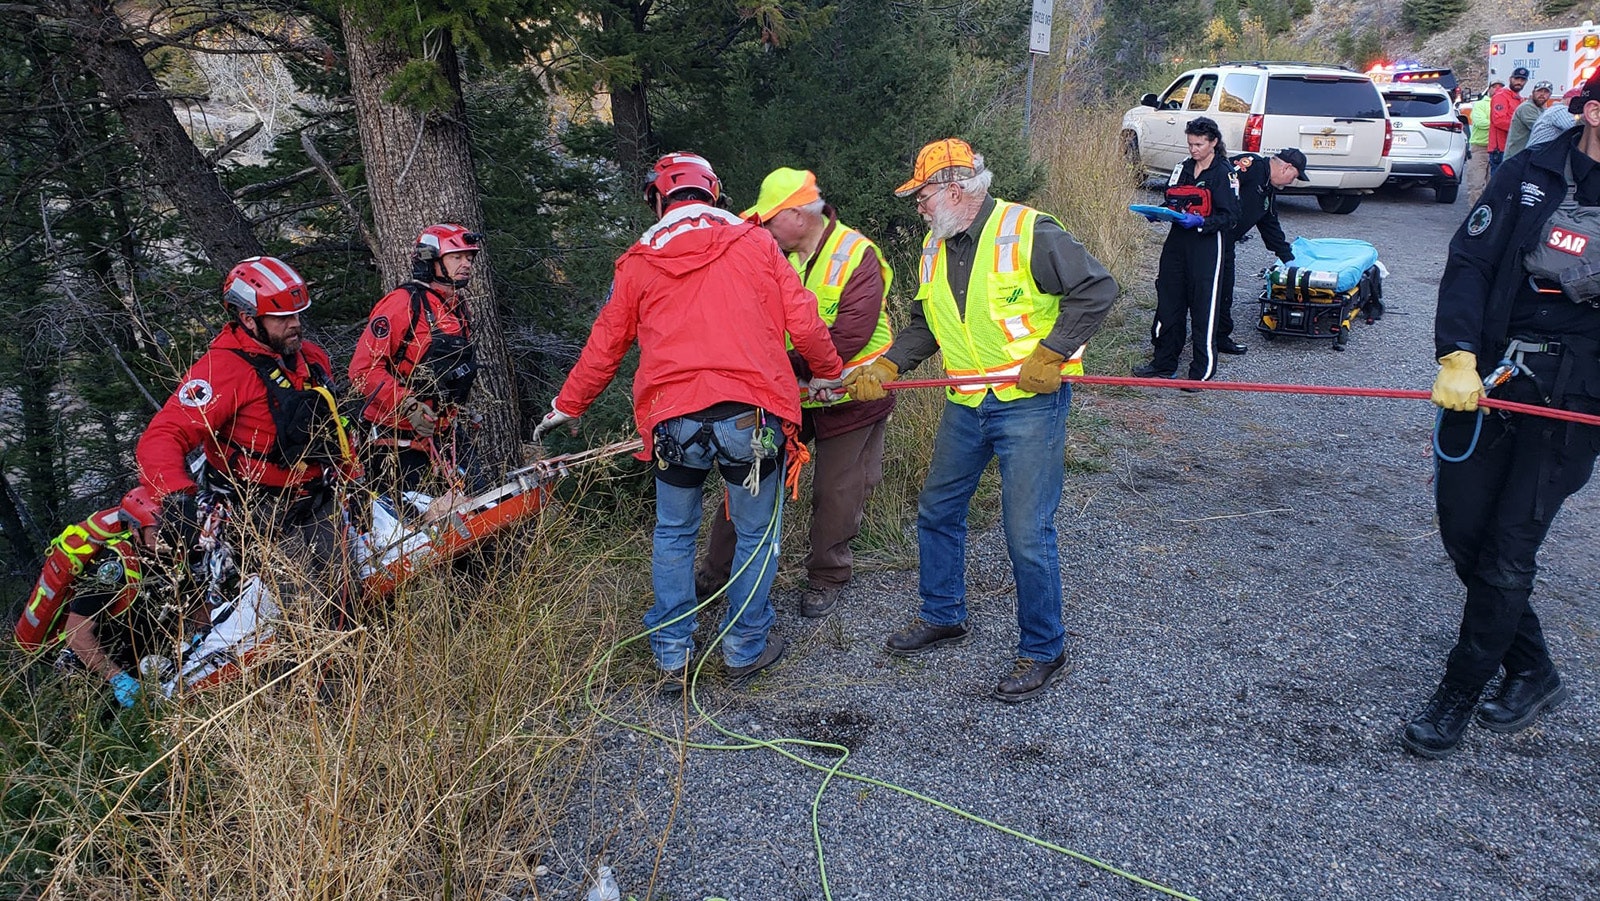 Search and rescue responders and volunteers help retrieve a woman who slipped and fell in the Shell Falls area of Big Horn County on Sunday.